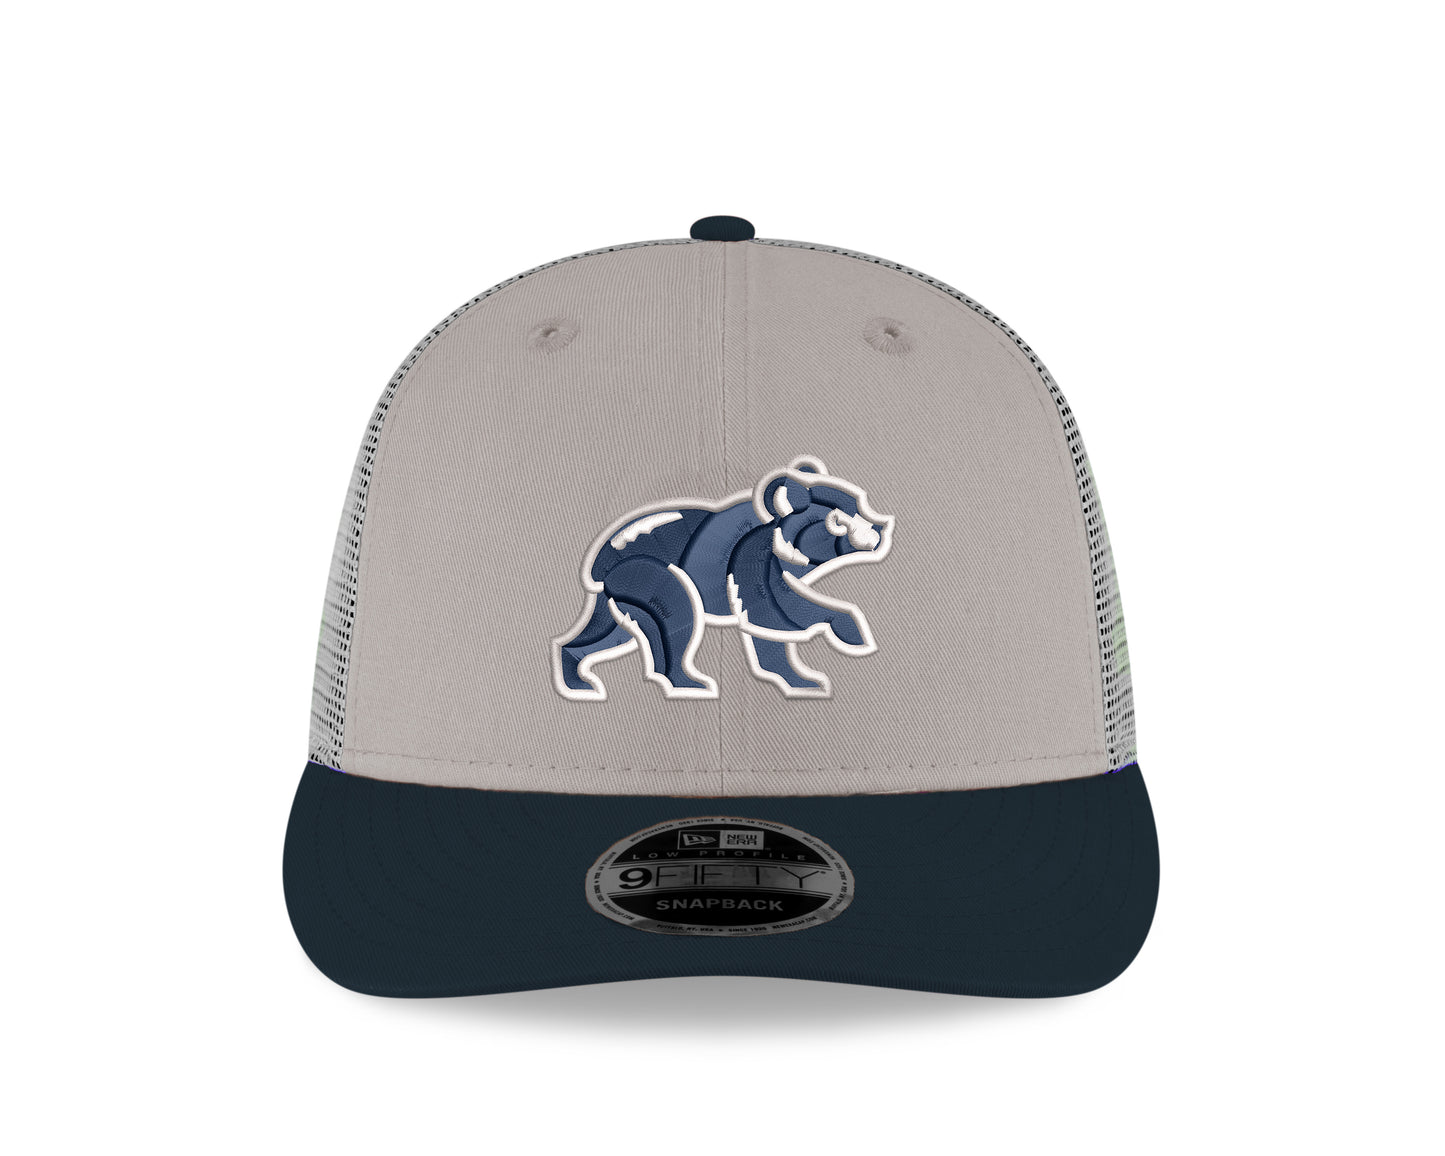 Chicago Cubs New Era Stone/Navy Spring Training Bear Low Profile 9FIFTY Mesh Back Snapback Adjustable Hat